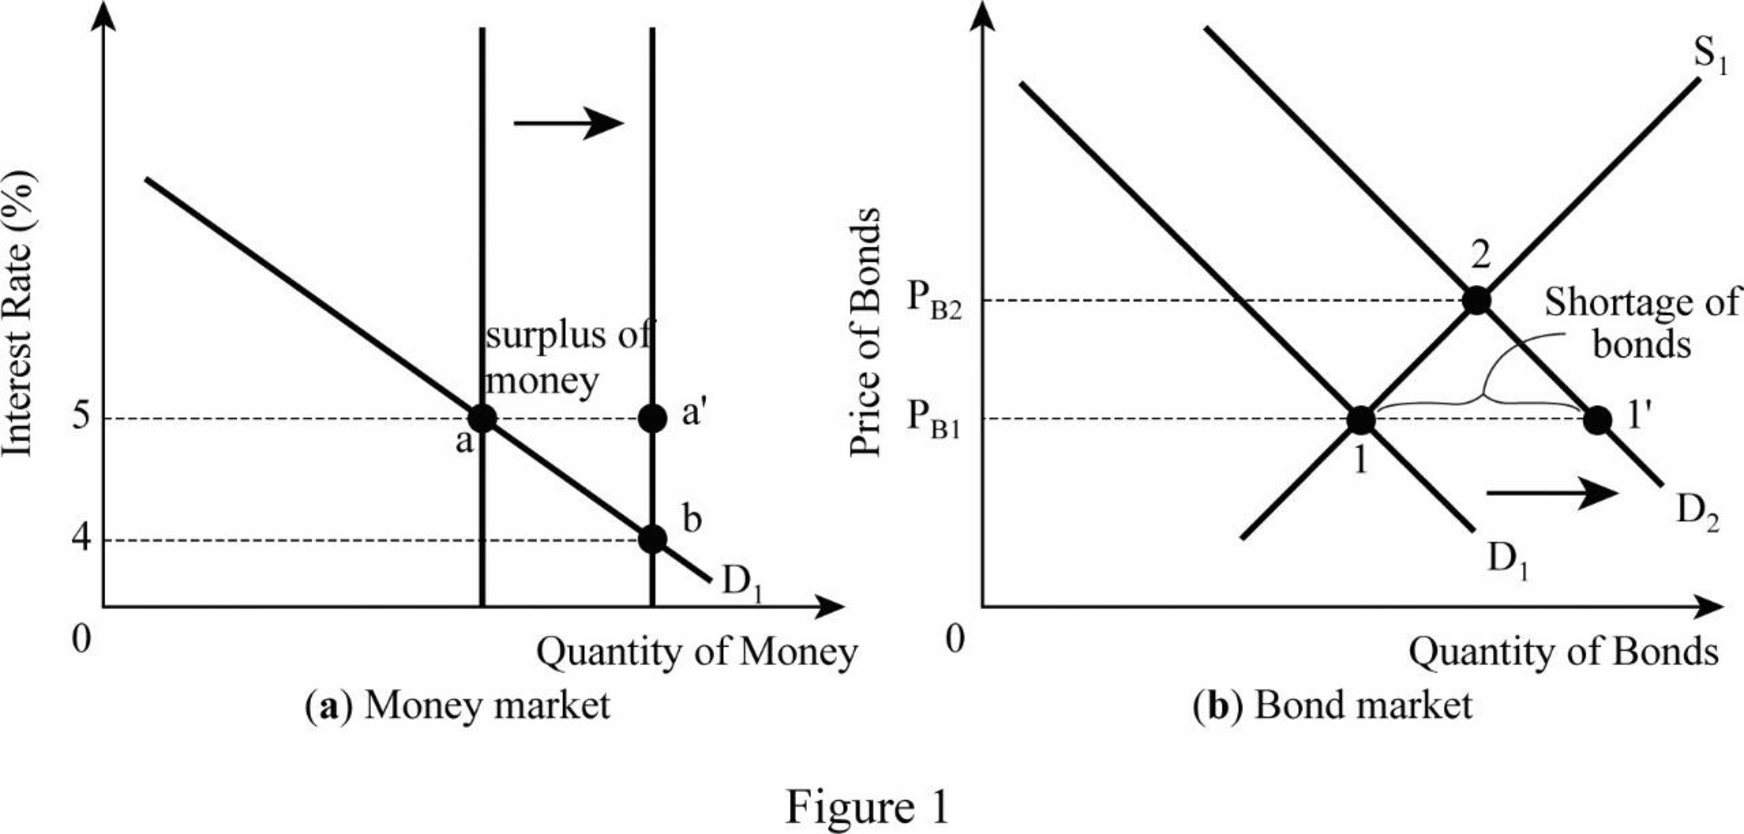 Draw both the money market and bond market in equilibrium ...